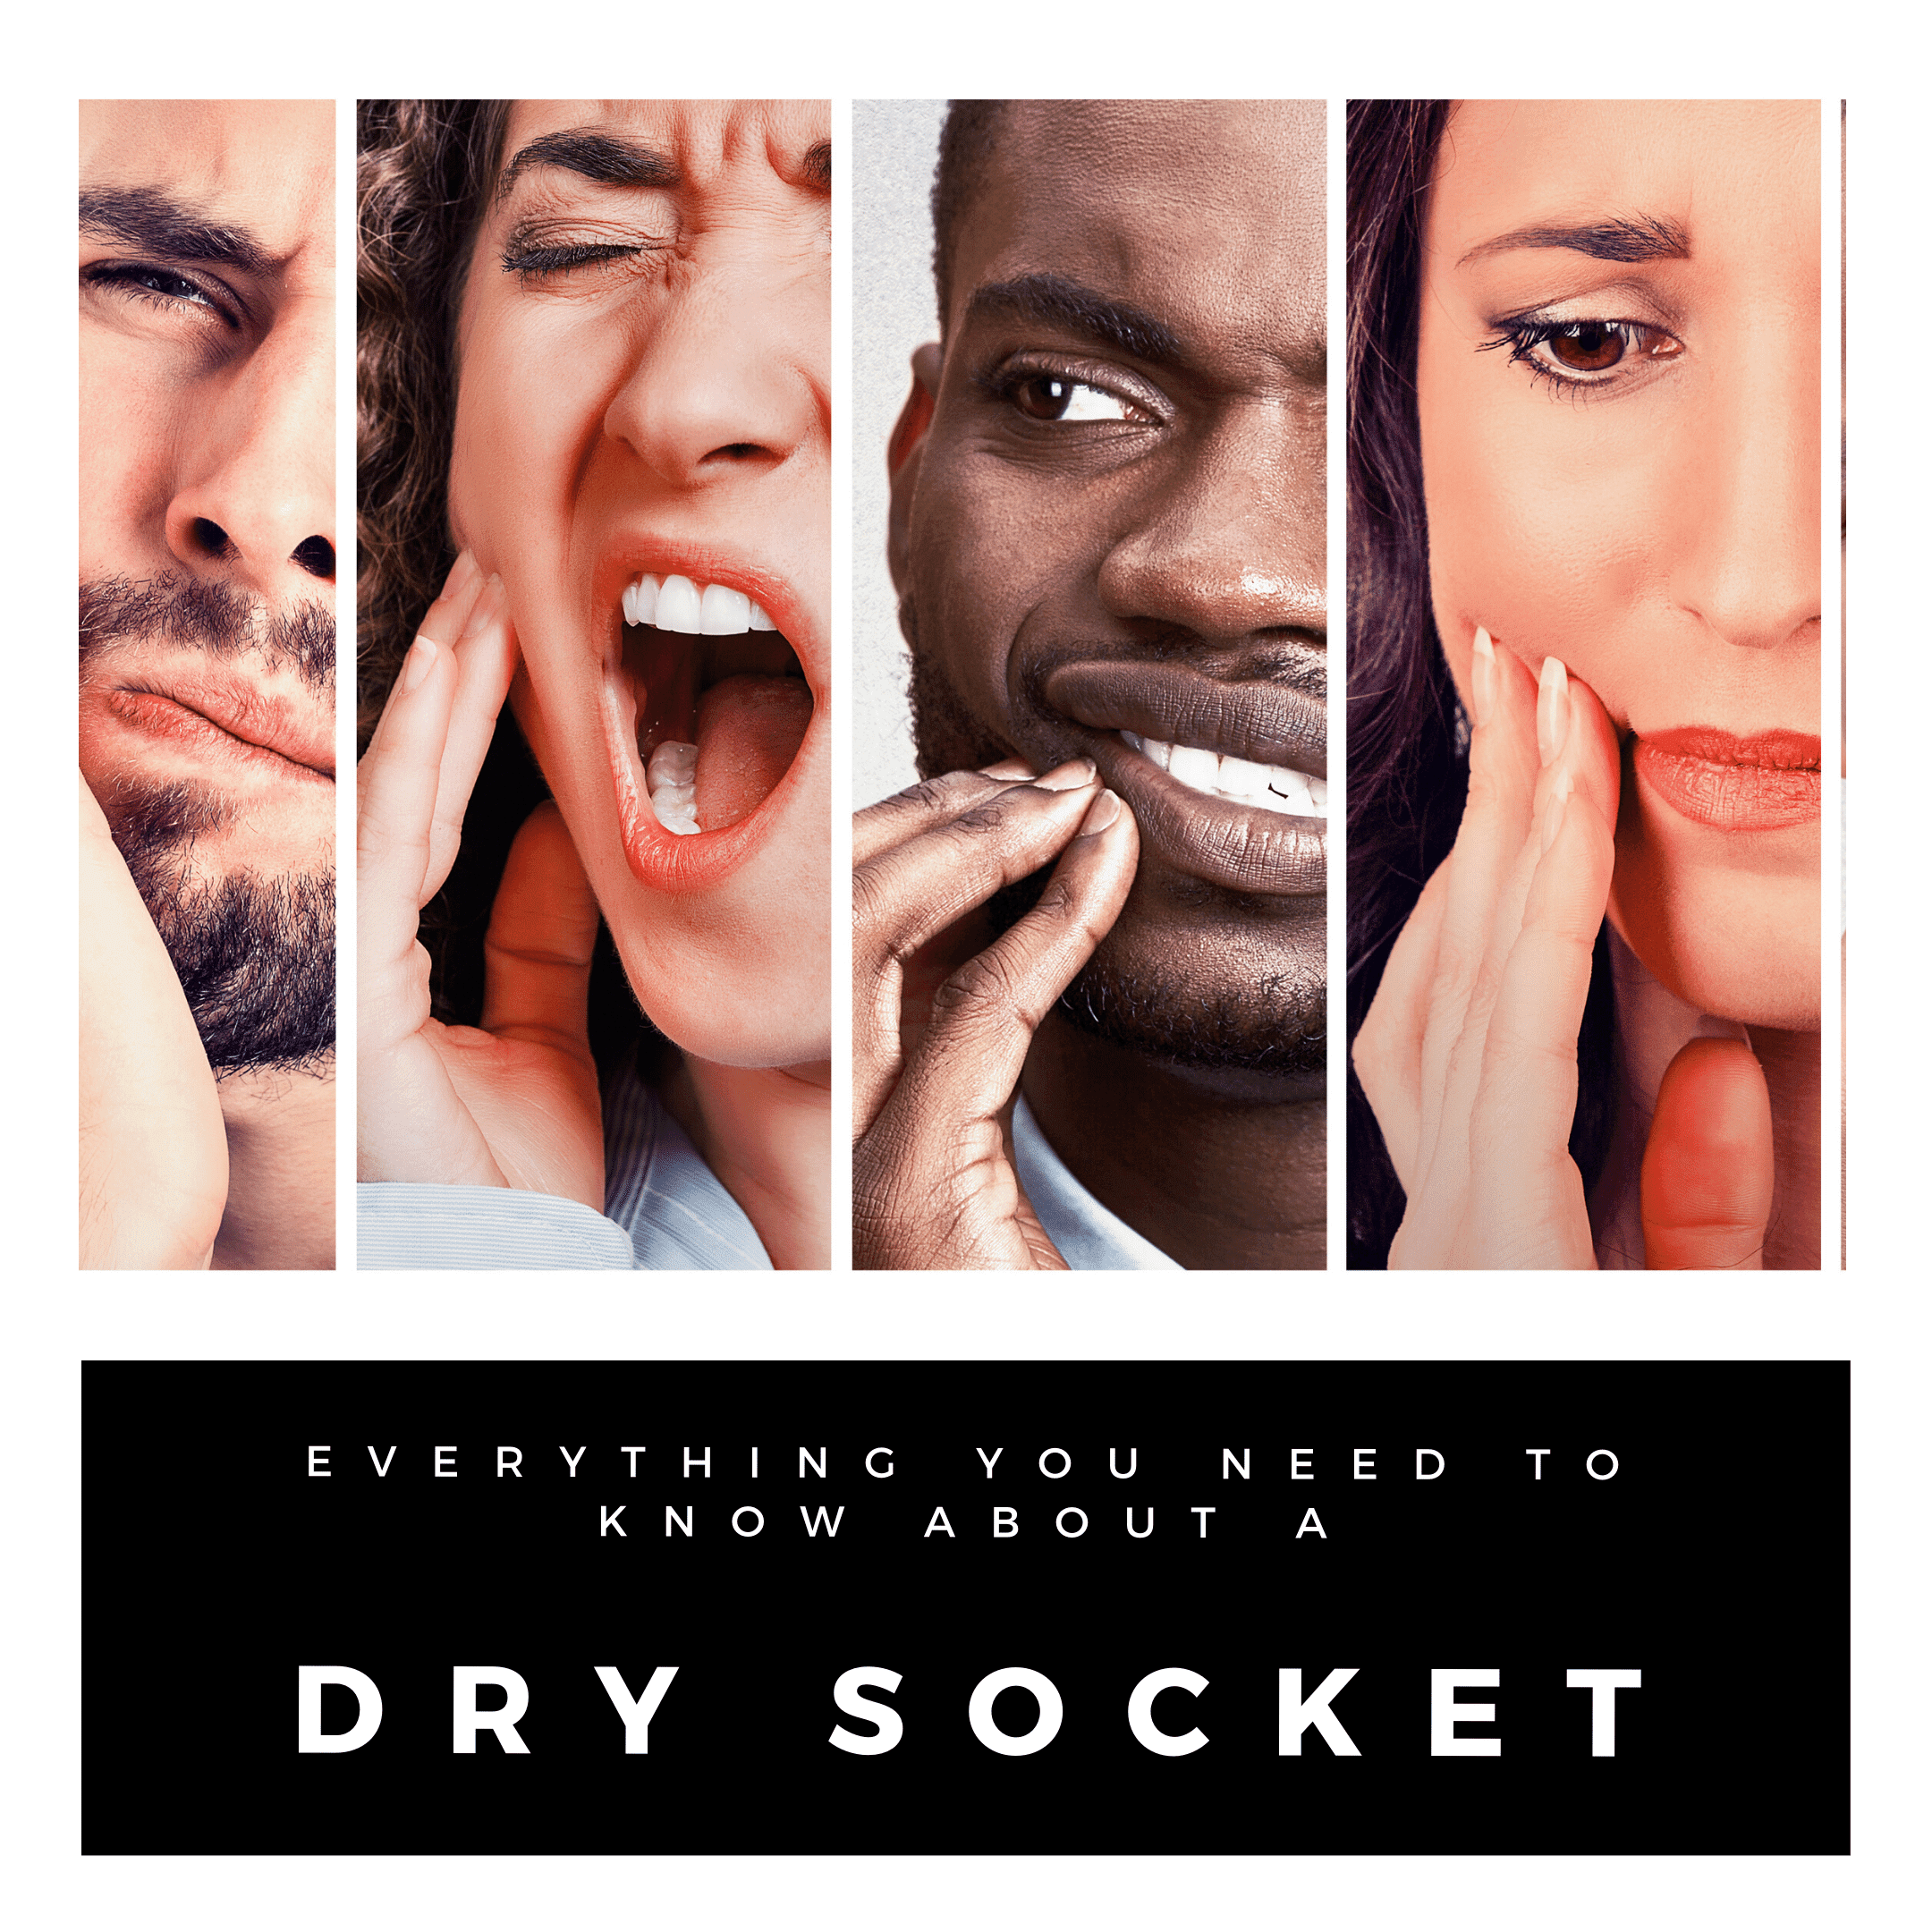 A Dry Socket - What is it, why does it happen, and how is it